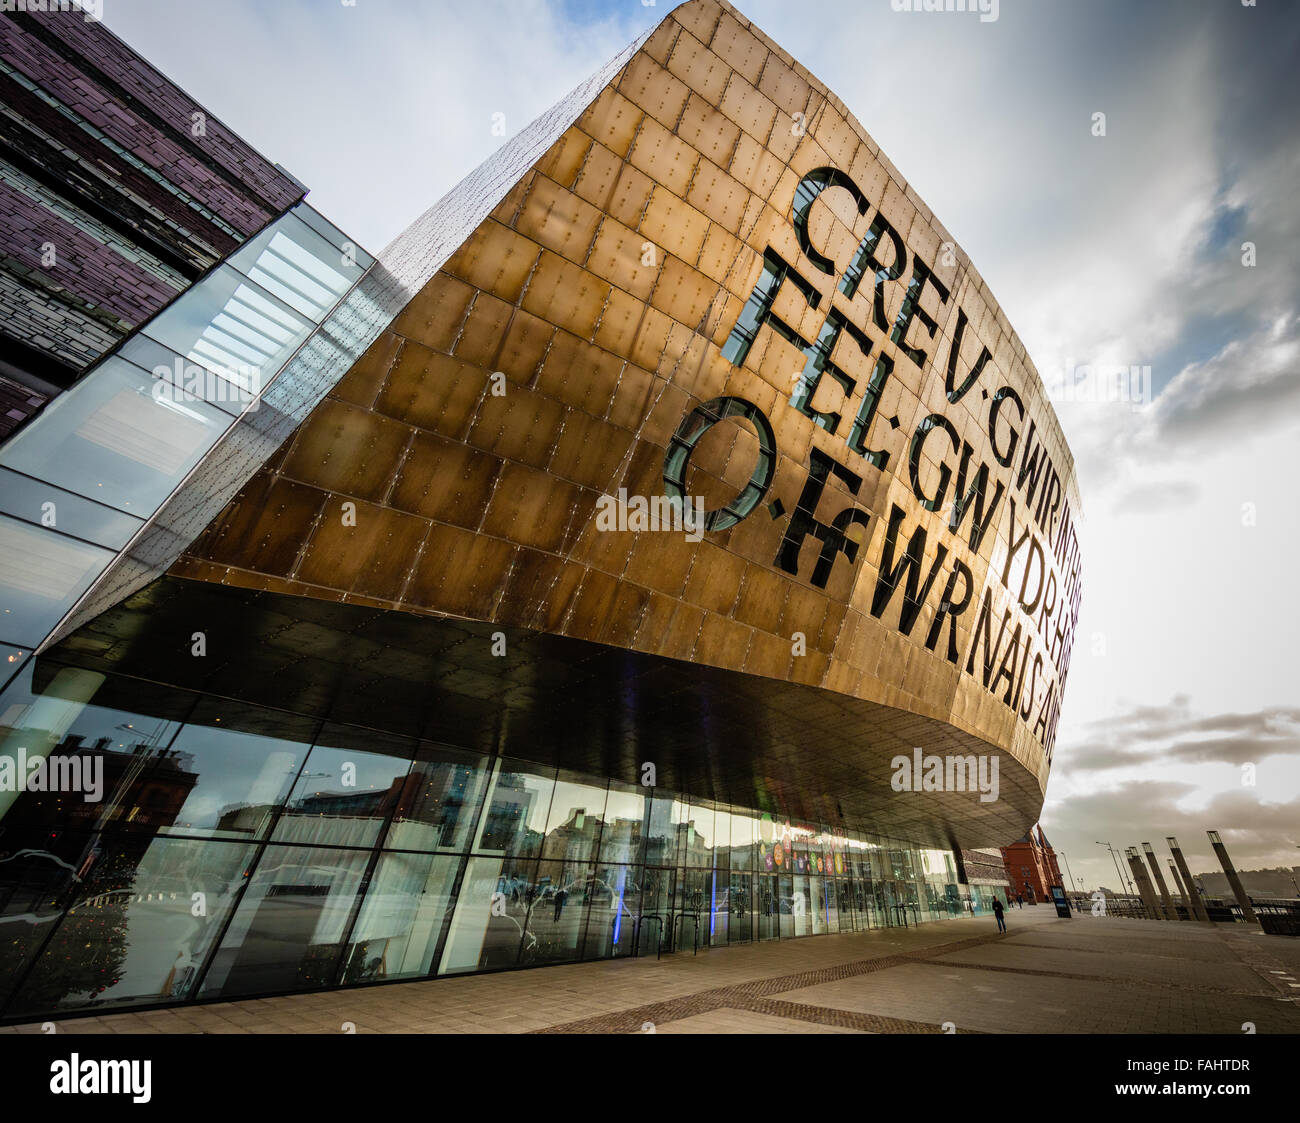 The Wales Millennium Centre in Cardiff Bay Wales is a theatre and cultural centre with a striking metal facade Stock Photo